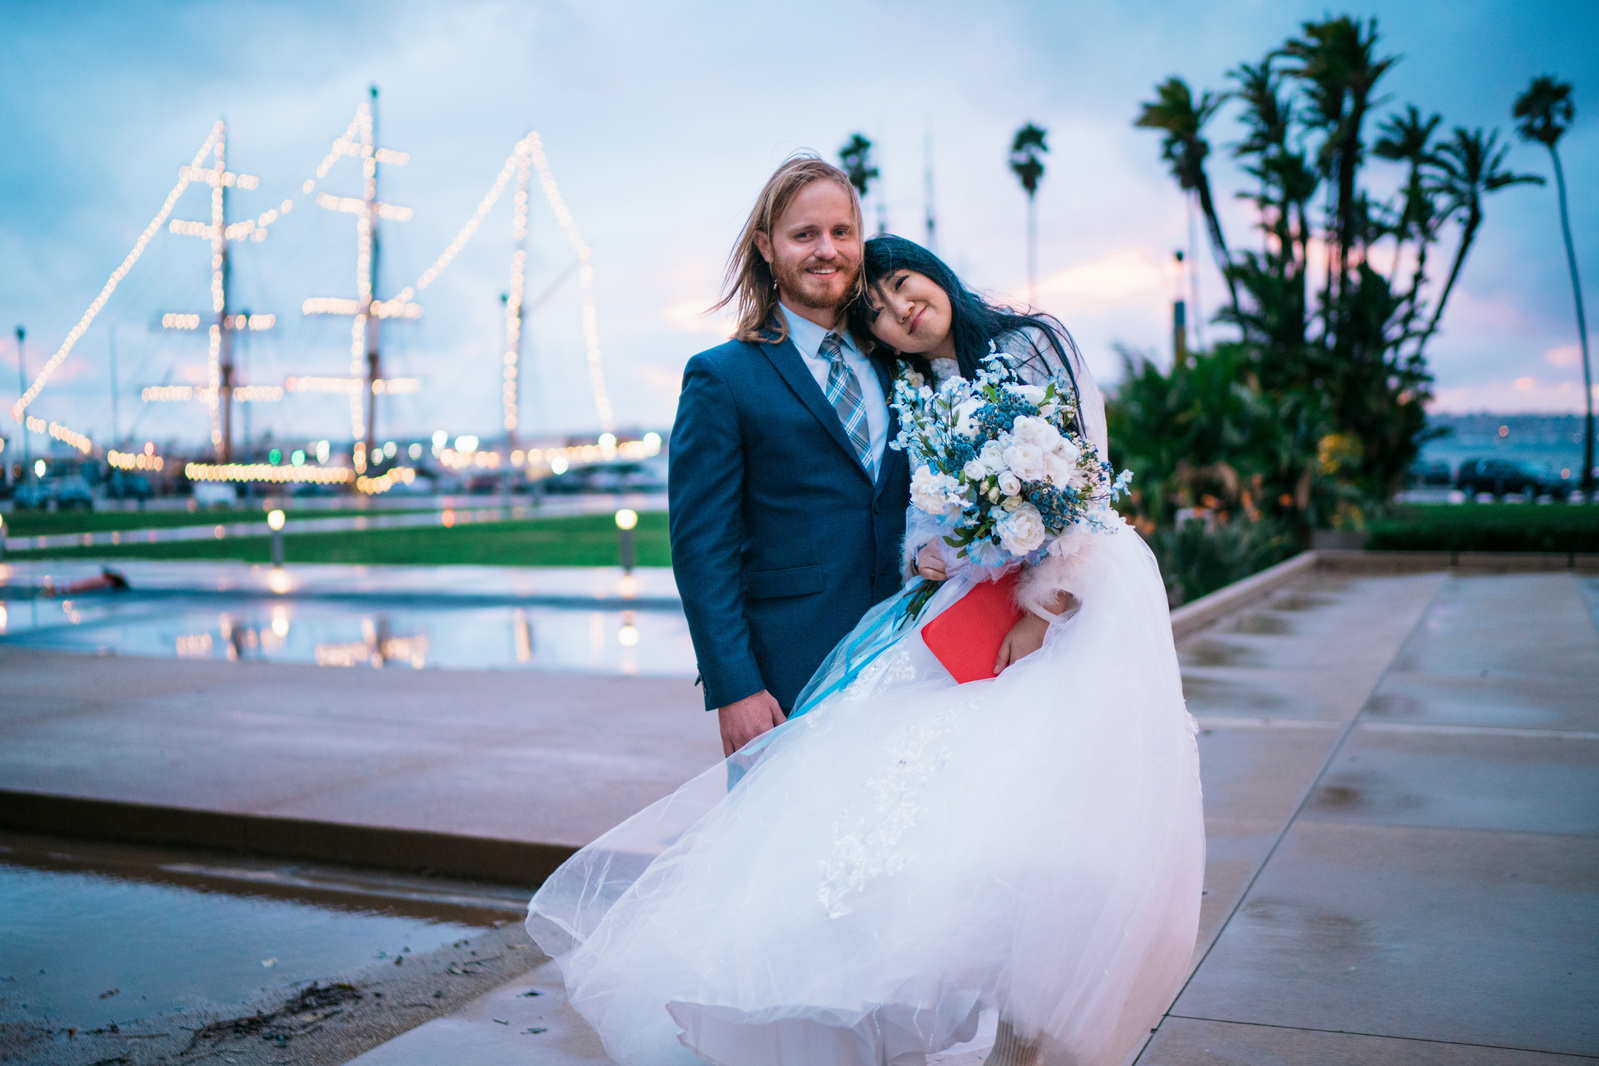 On a rainy day husband and wife pose for a portrait in front a ship and palm trees after their wedding at San Diego City Hall